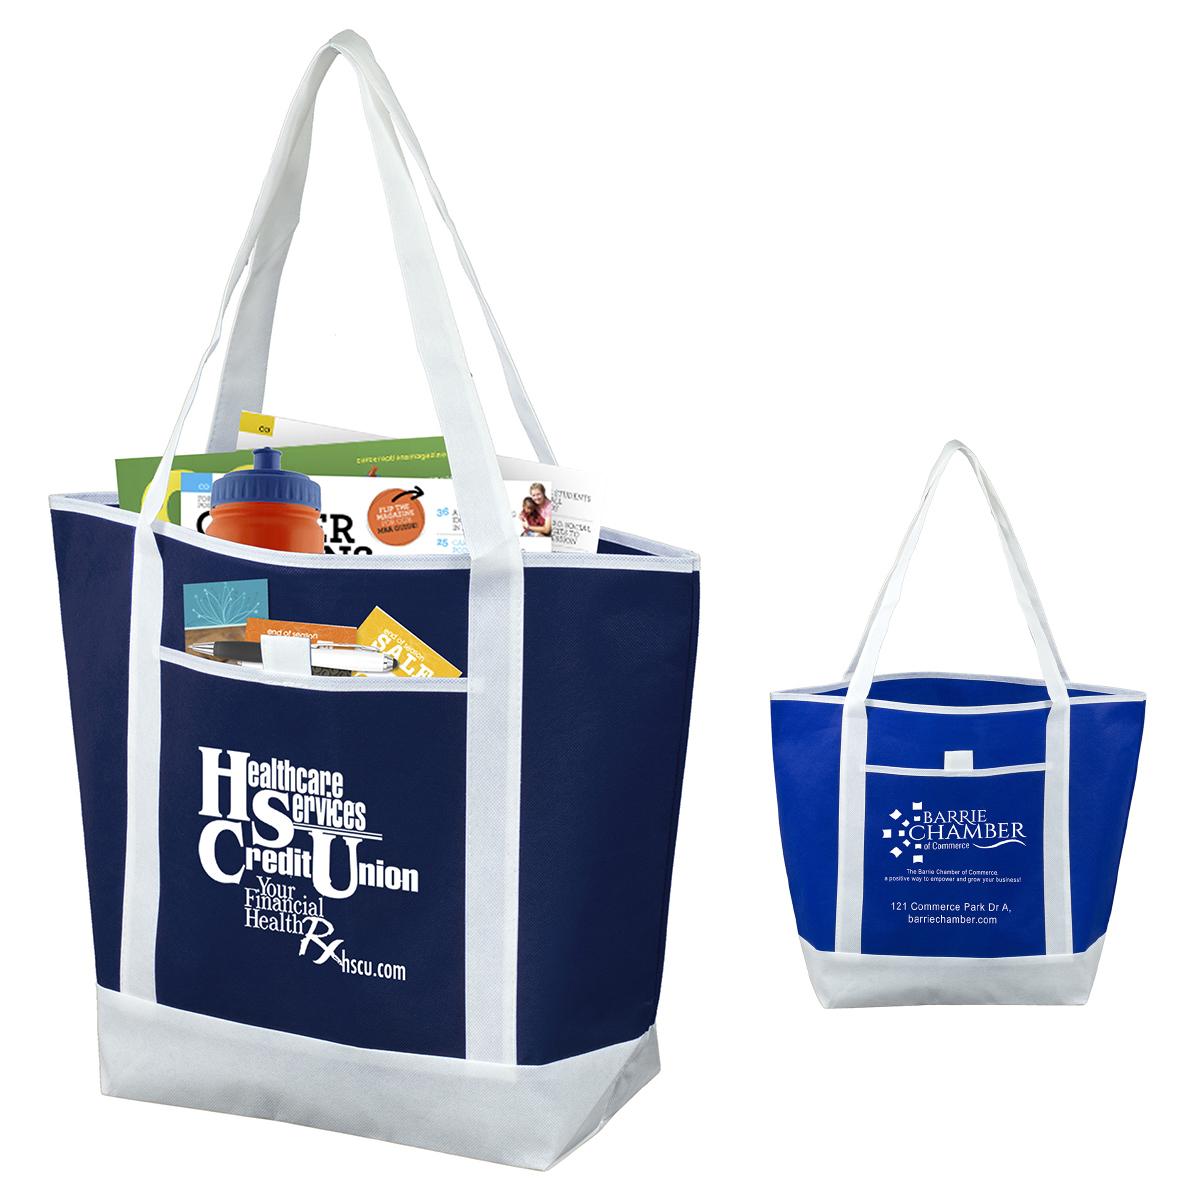 17-1/2" W x 13-1/2" H x 6" D - "THE LIBERTY" Beach, Corporate and Travel Boat Tote Bag